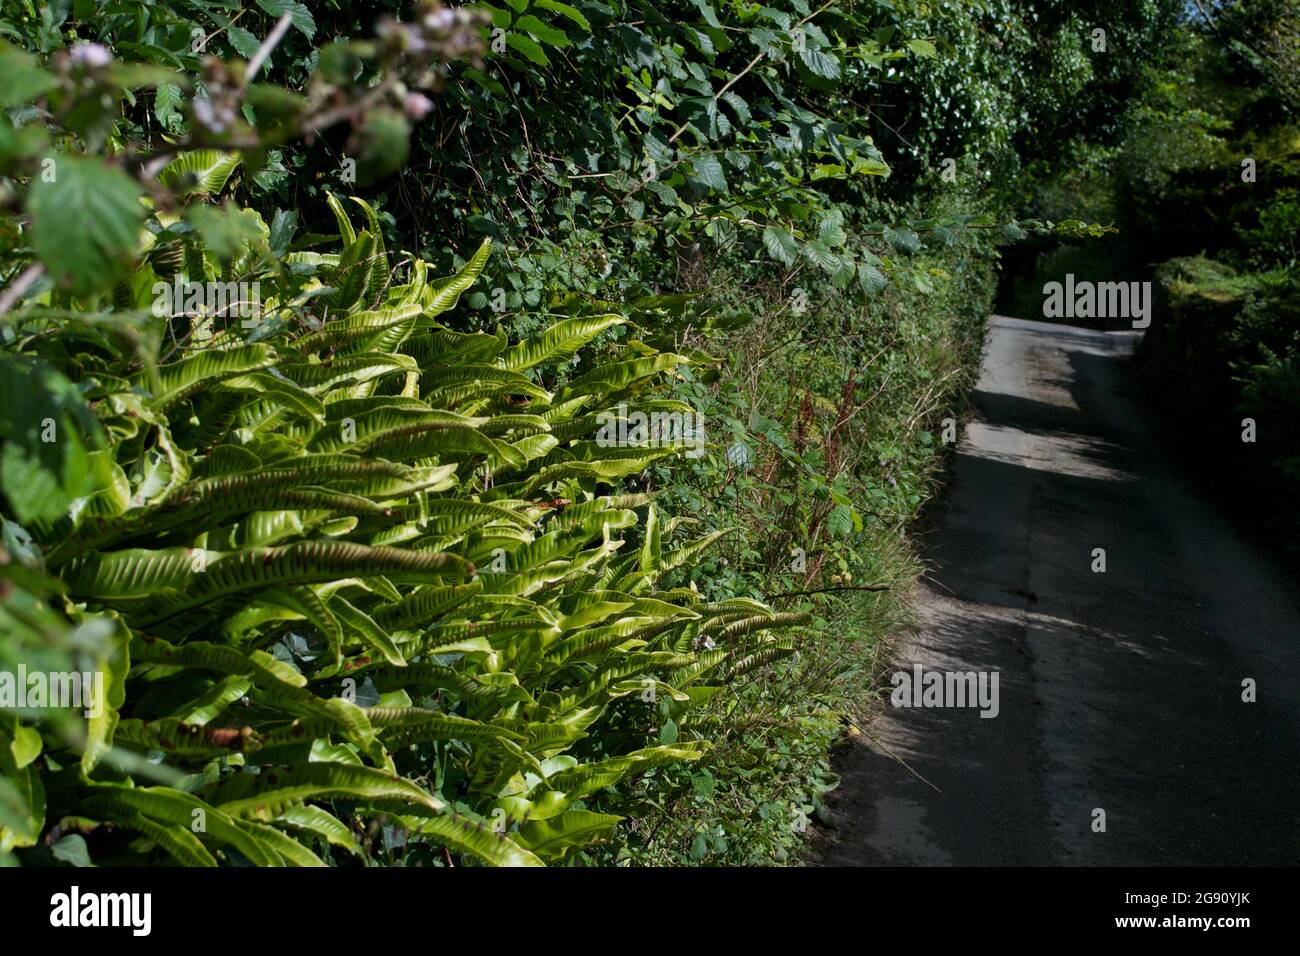 Hart's Tongue Fern (Phyllitis scolopendrium) - wild fern with undivided fronds and large spore cases, growing in the hedgerow of a narrow countryside Stock Photo